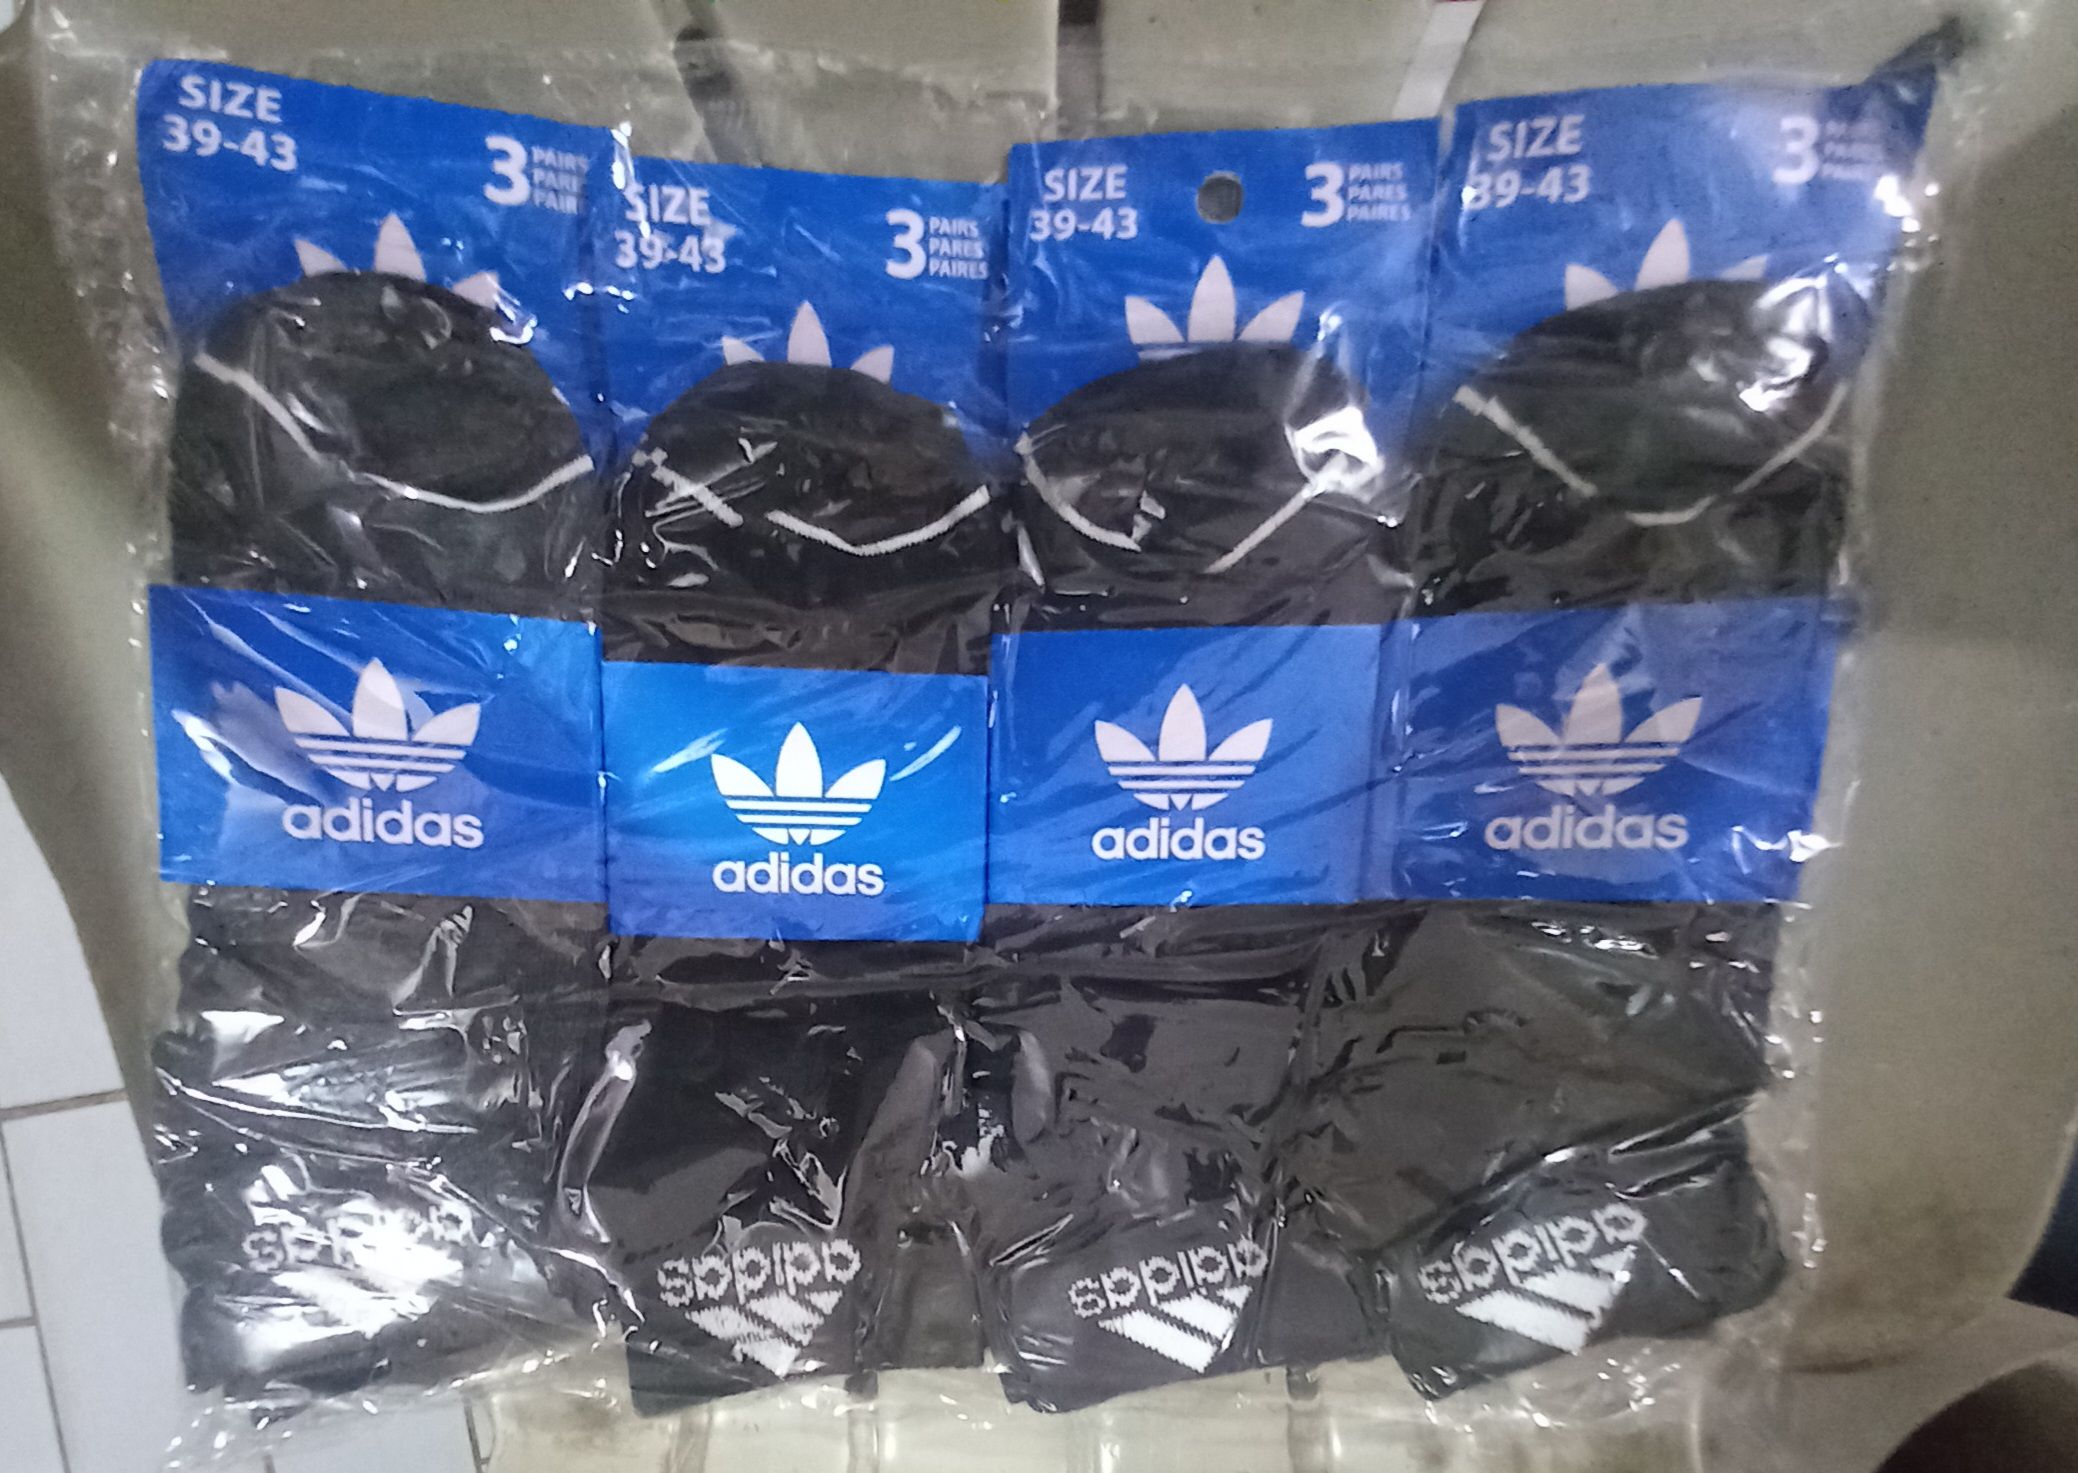 Buy 06 Pairs - Branded Adidas Ankle Socks for Men/Boys at Lowest Price ...